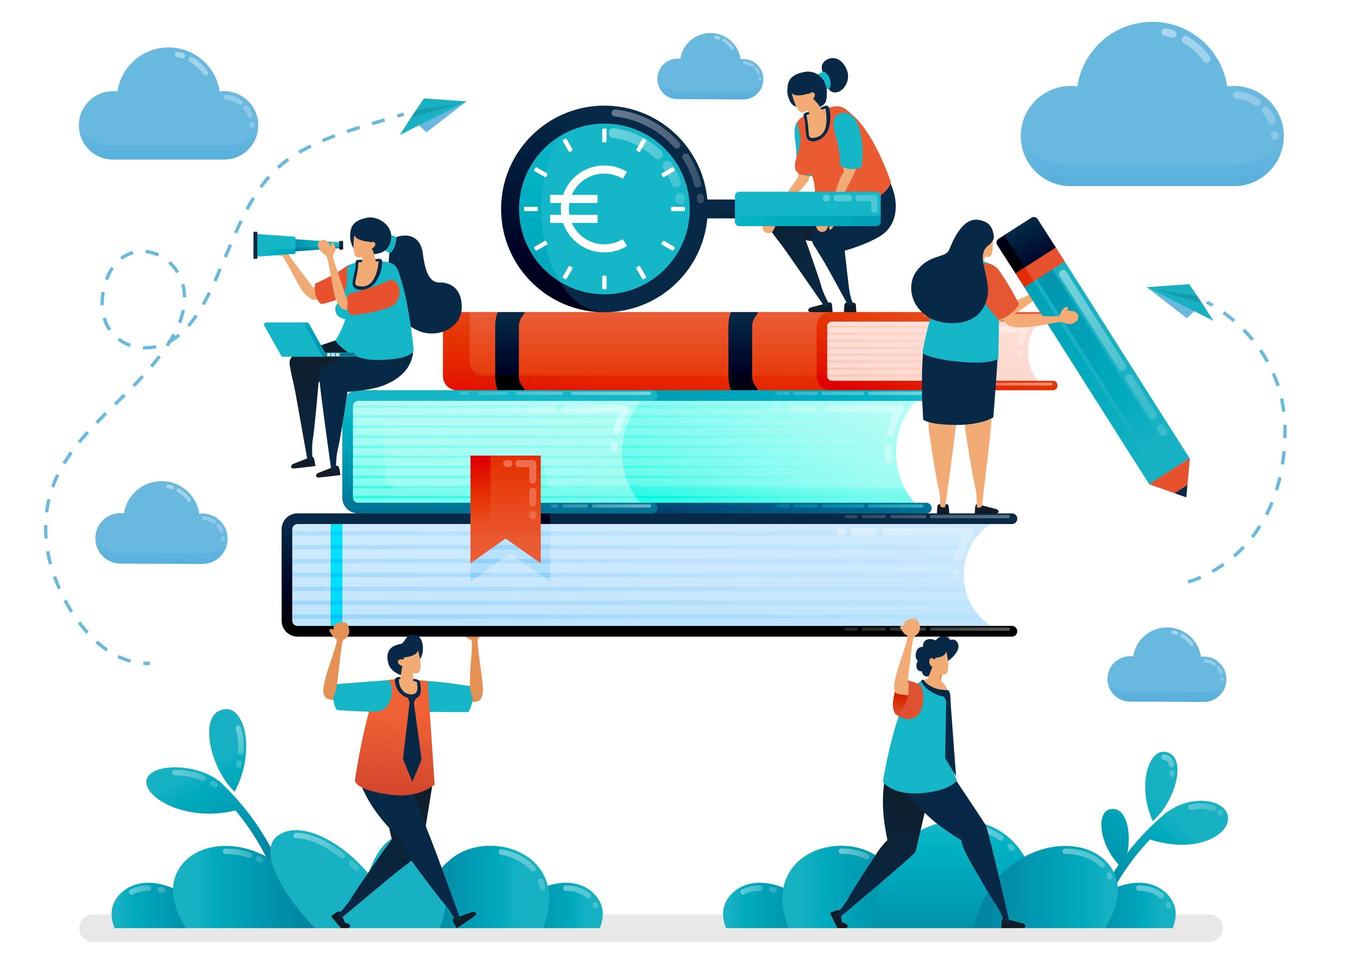 Metaphors of burden of education costs. Students carry heavy books. Looking for education funding. Free school scholarship program. Vector illustration, graphic design, card, banner, brochure, flyer